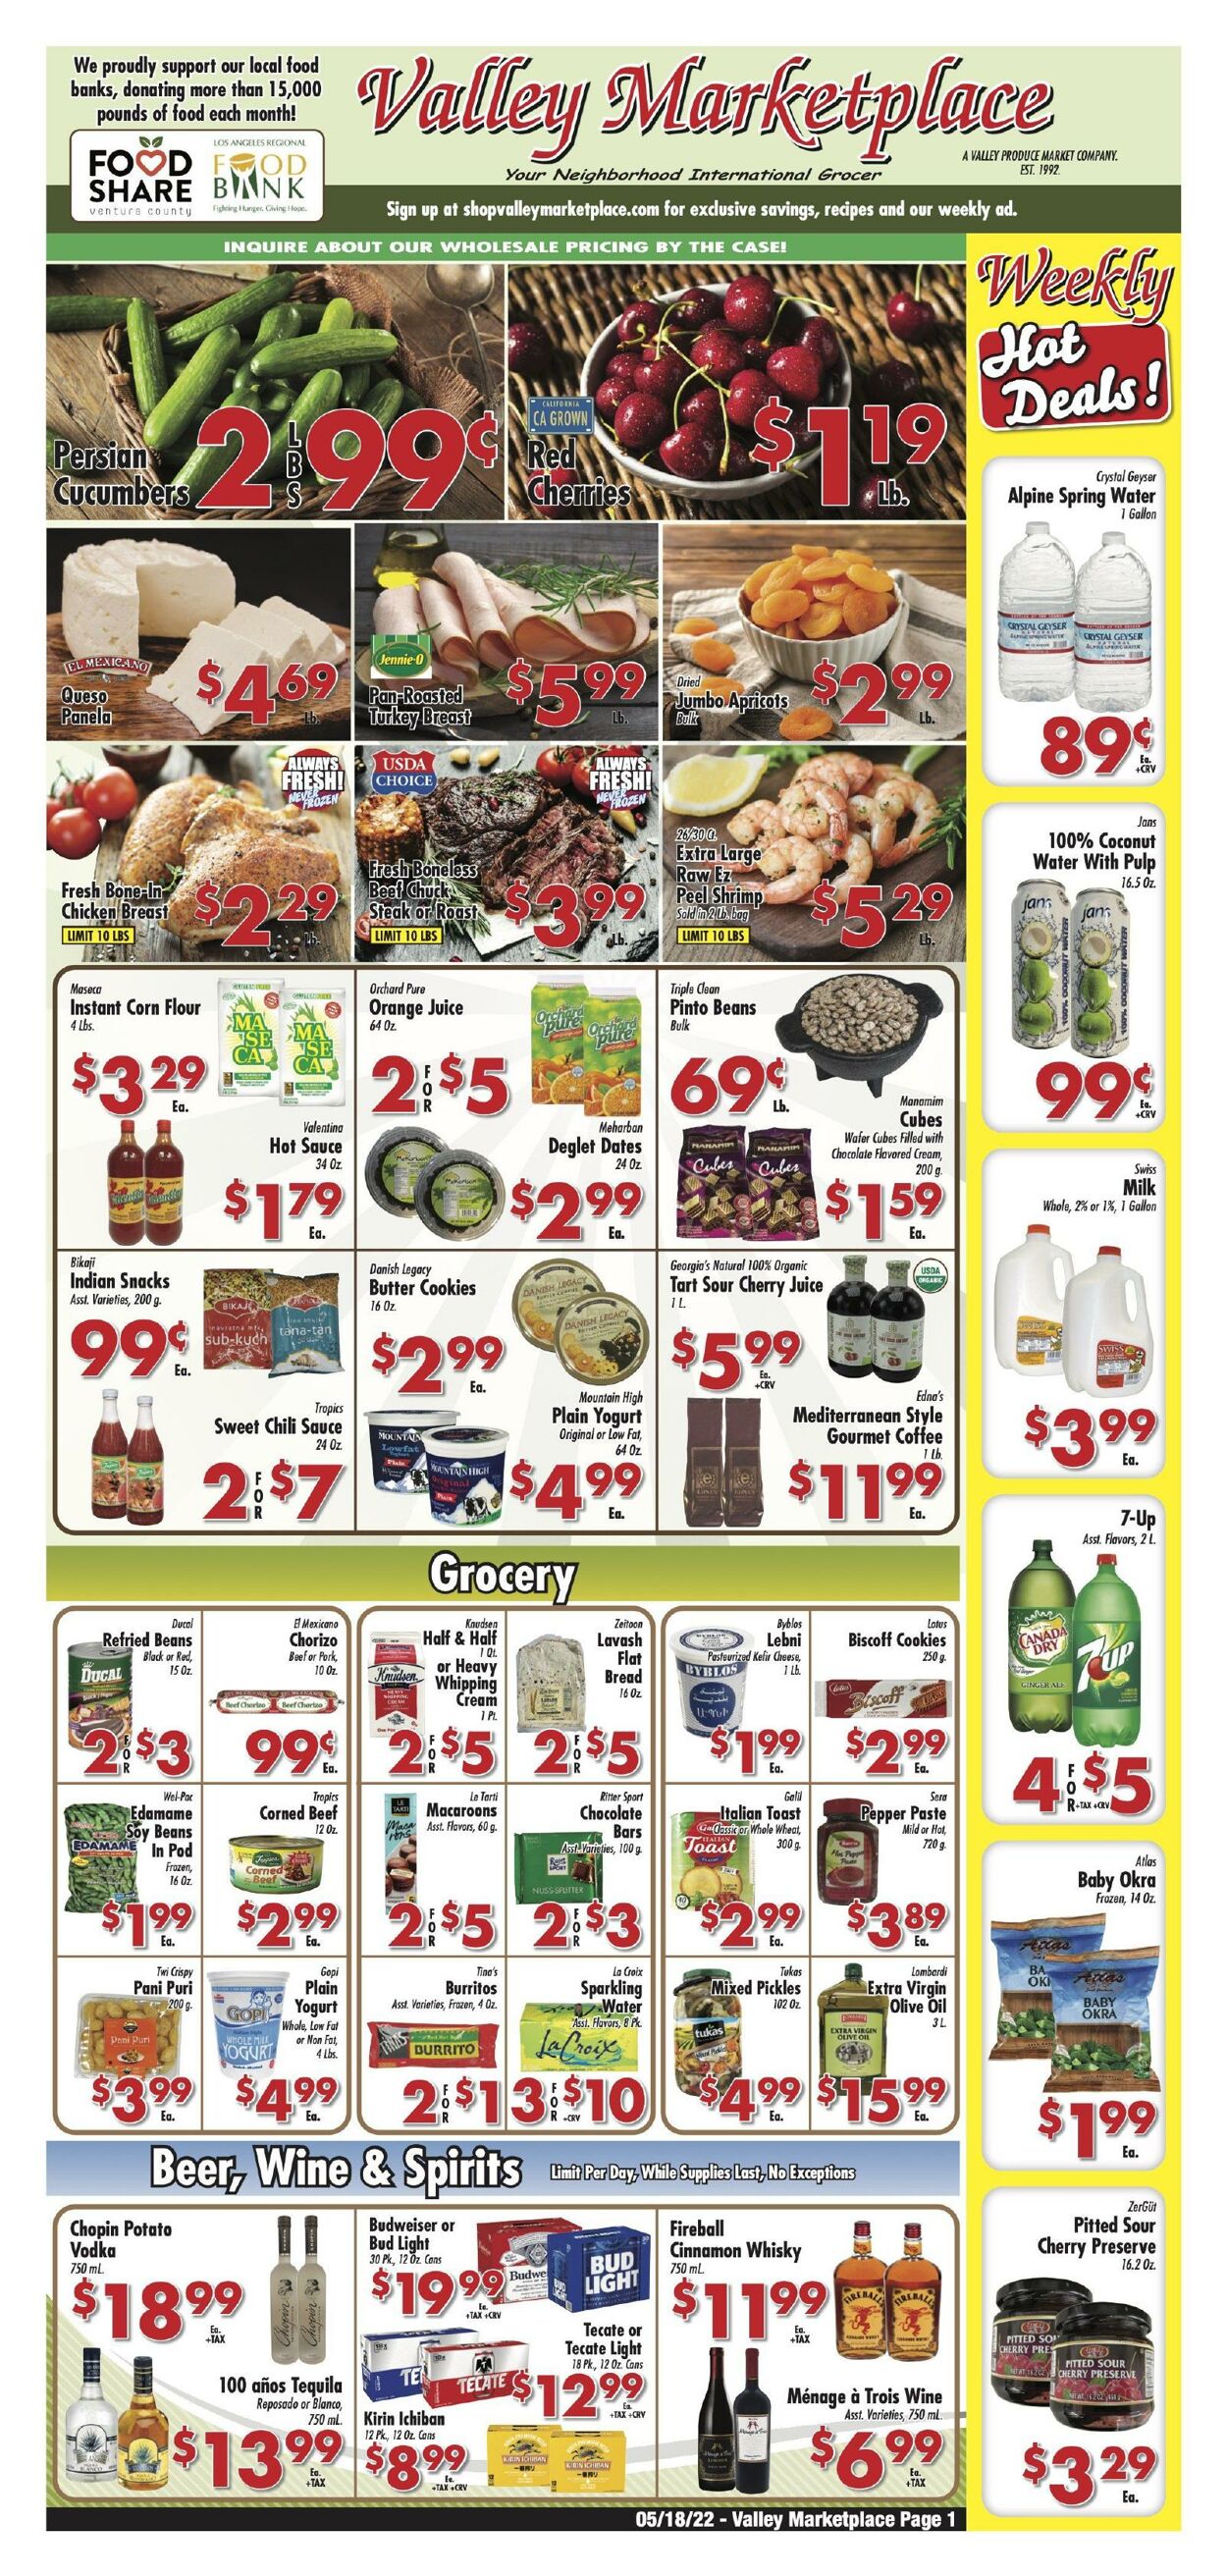 Valley Marketplace Promotional weekly ads